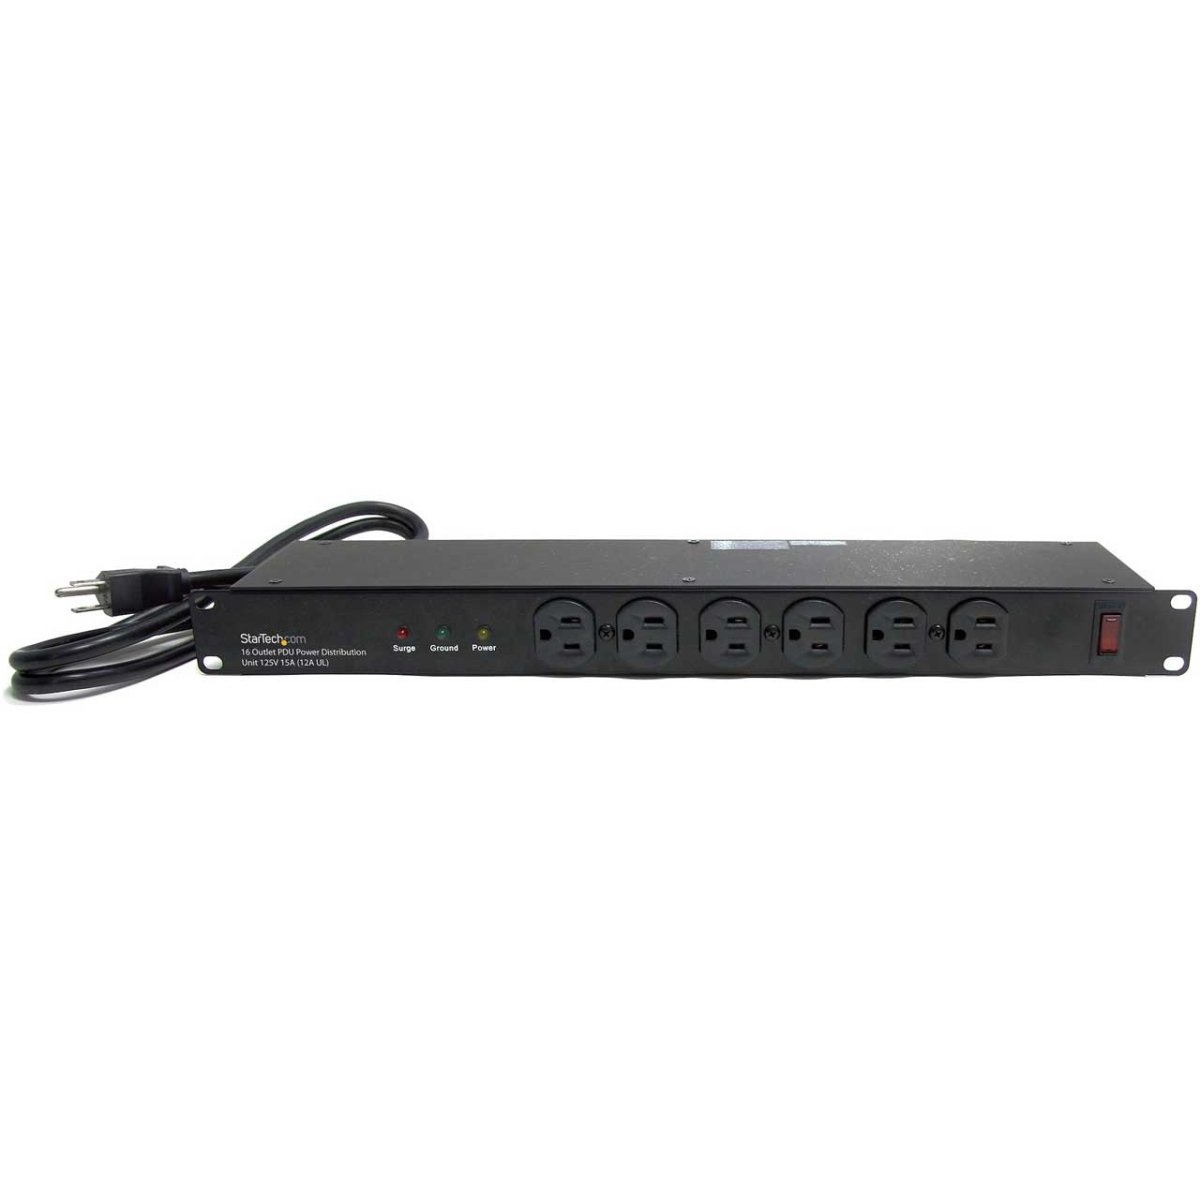 Picture of StarTech ST-RKPW161915 1RU Rackmount PDU with 16 Outlets & Surge Protection